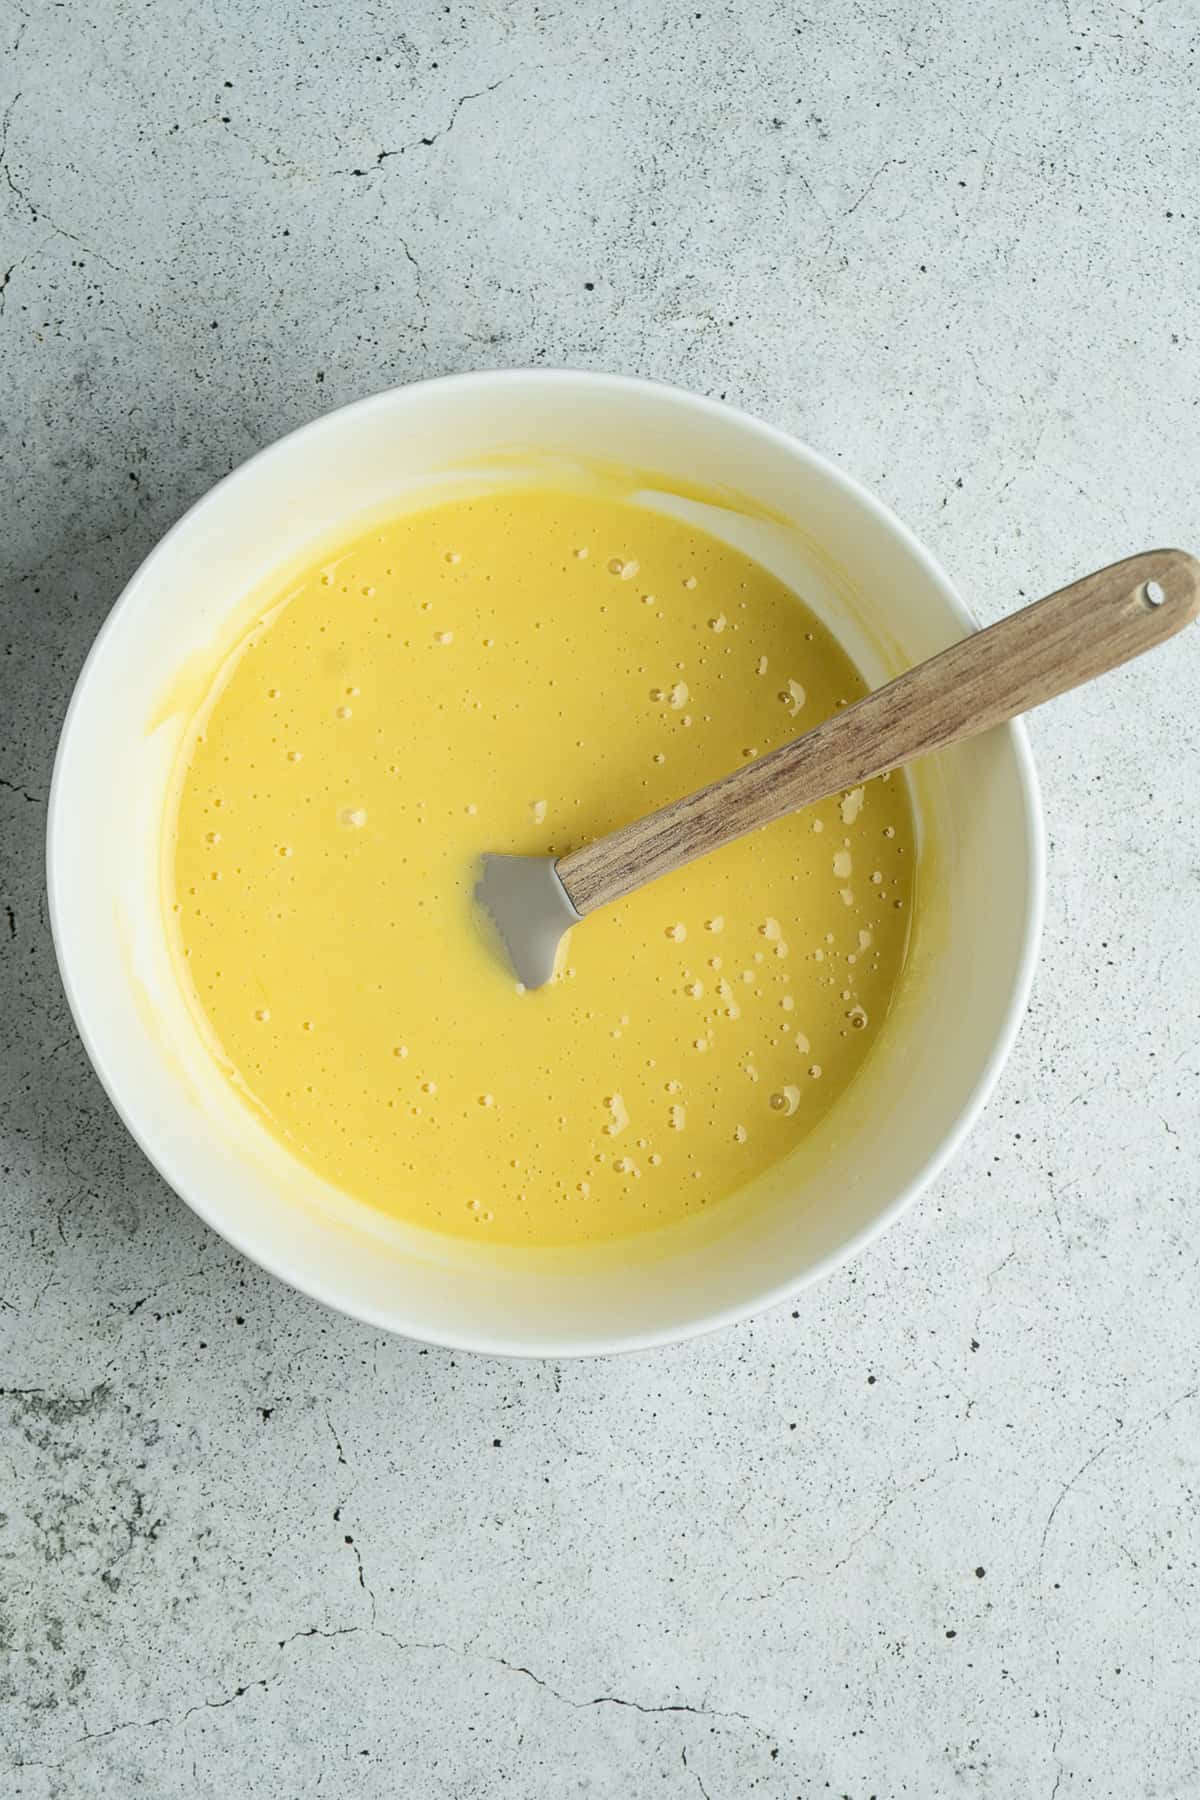 Egg yolk mixture with a spatula in a bowl.